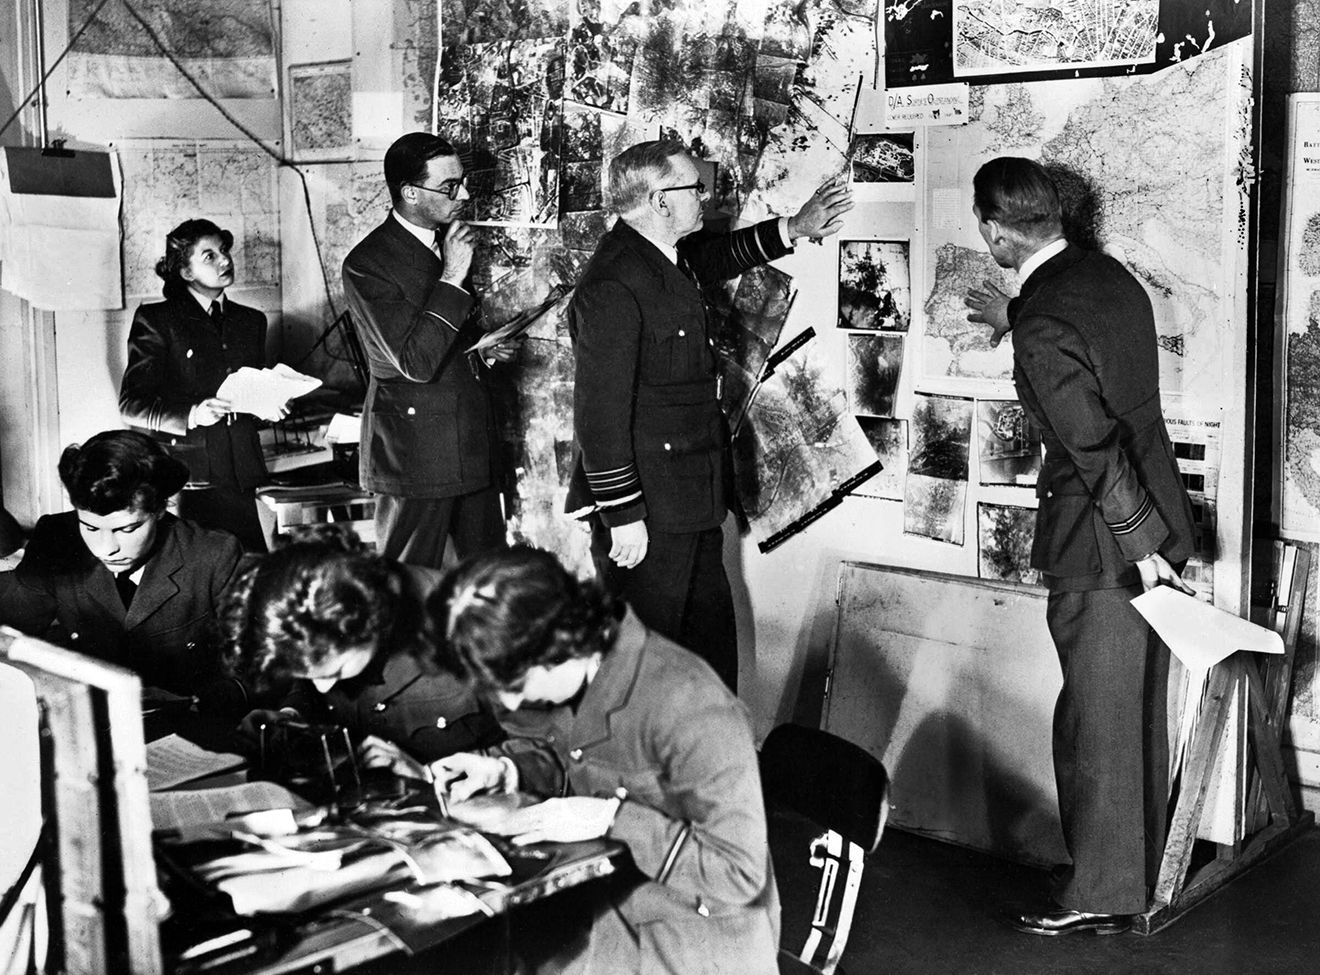 During a meeting at his Bomber Command Headquarters in High Wycombe, Air Chief Marshal Sir Arthur “Bomber” Harris examines reconnaissance photos from a raid on Nazi-occupied Europe.